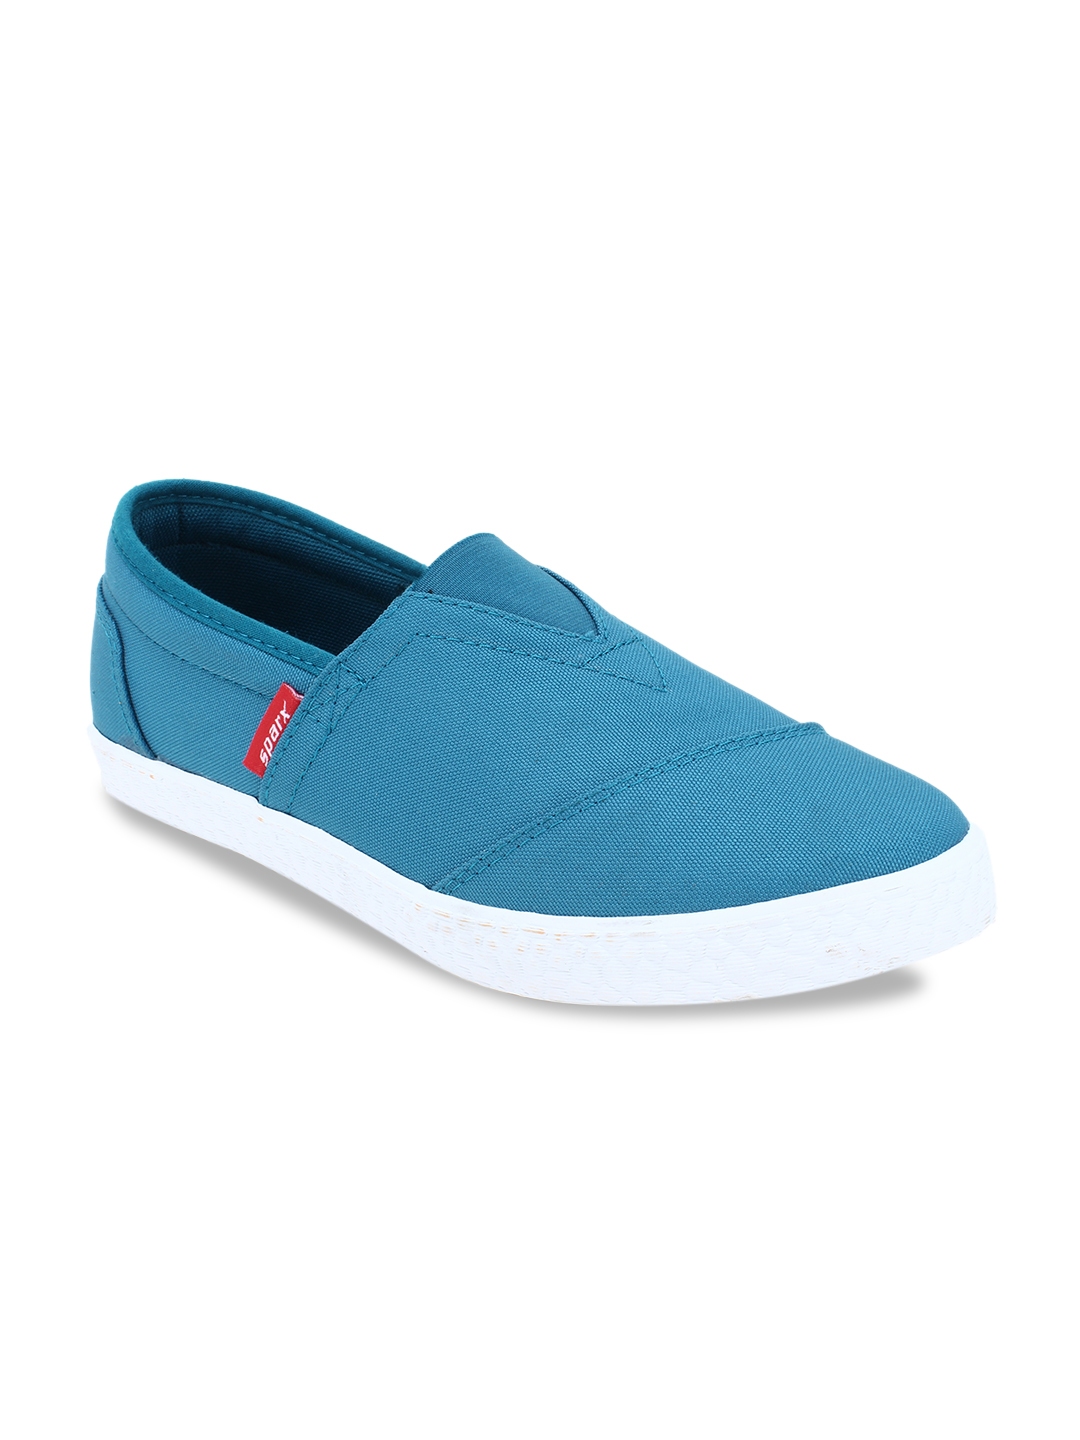 Buy Sparx Men Blue Slip On Sneakers - Casual Shoes for Men 11497090 ...